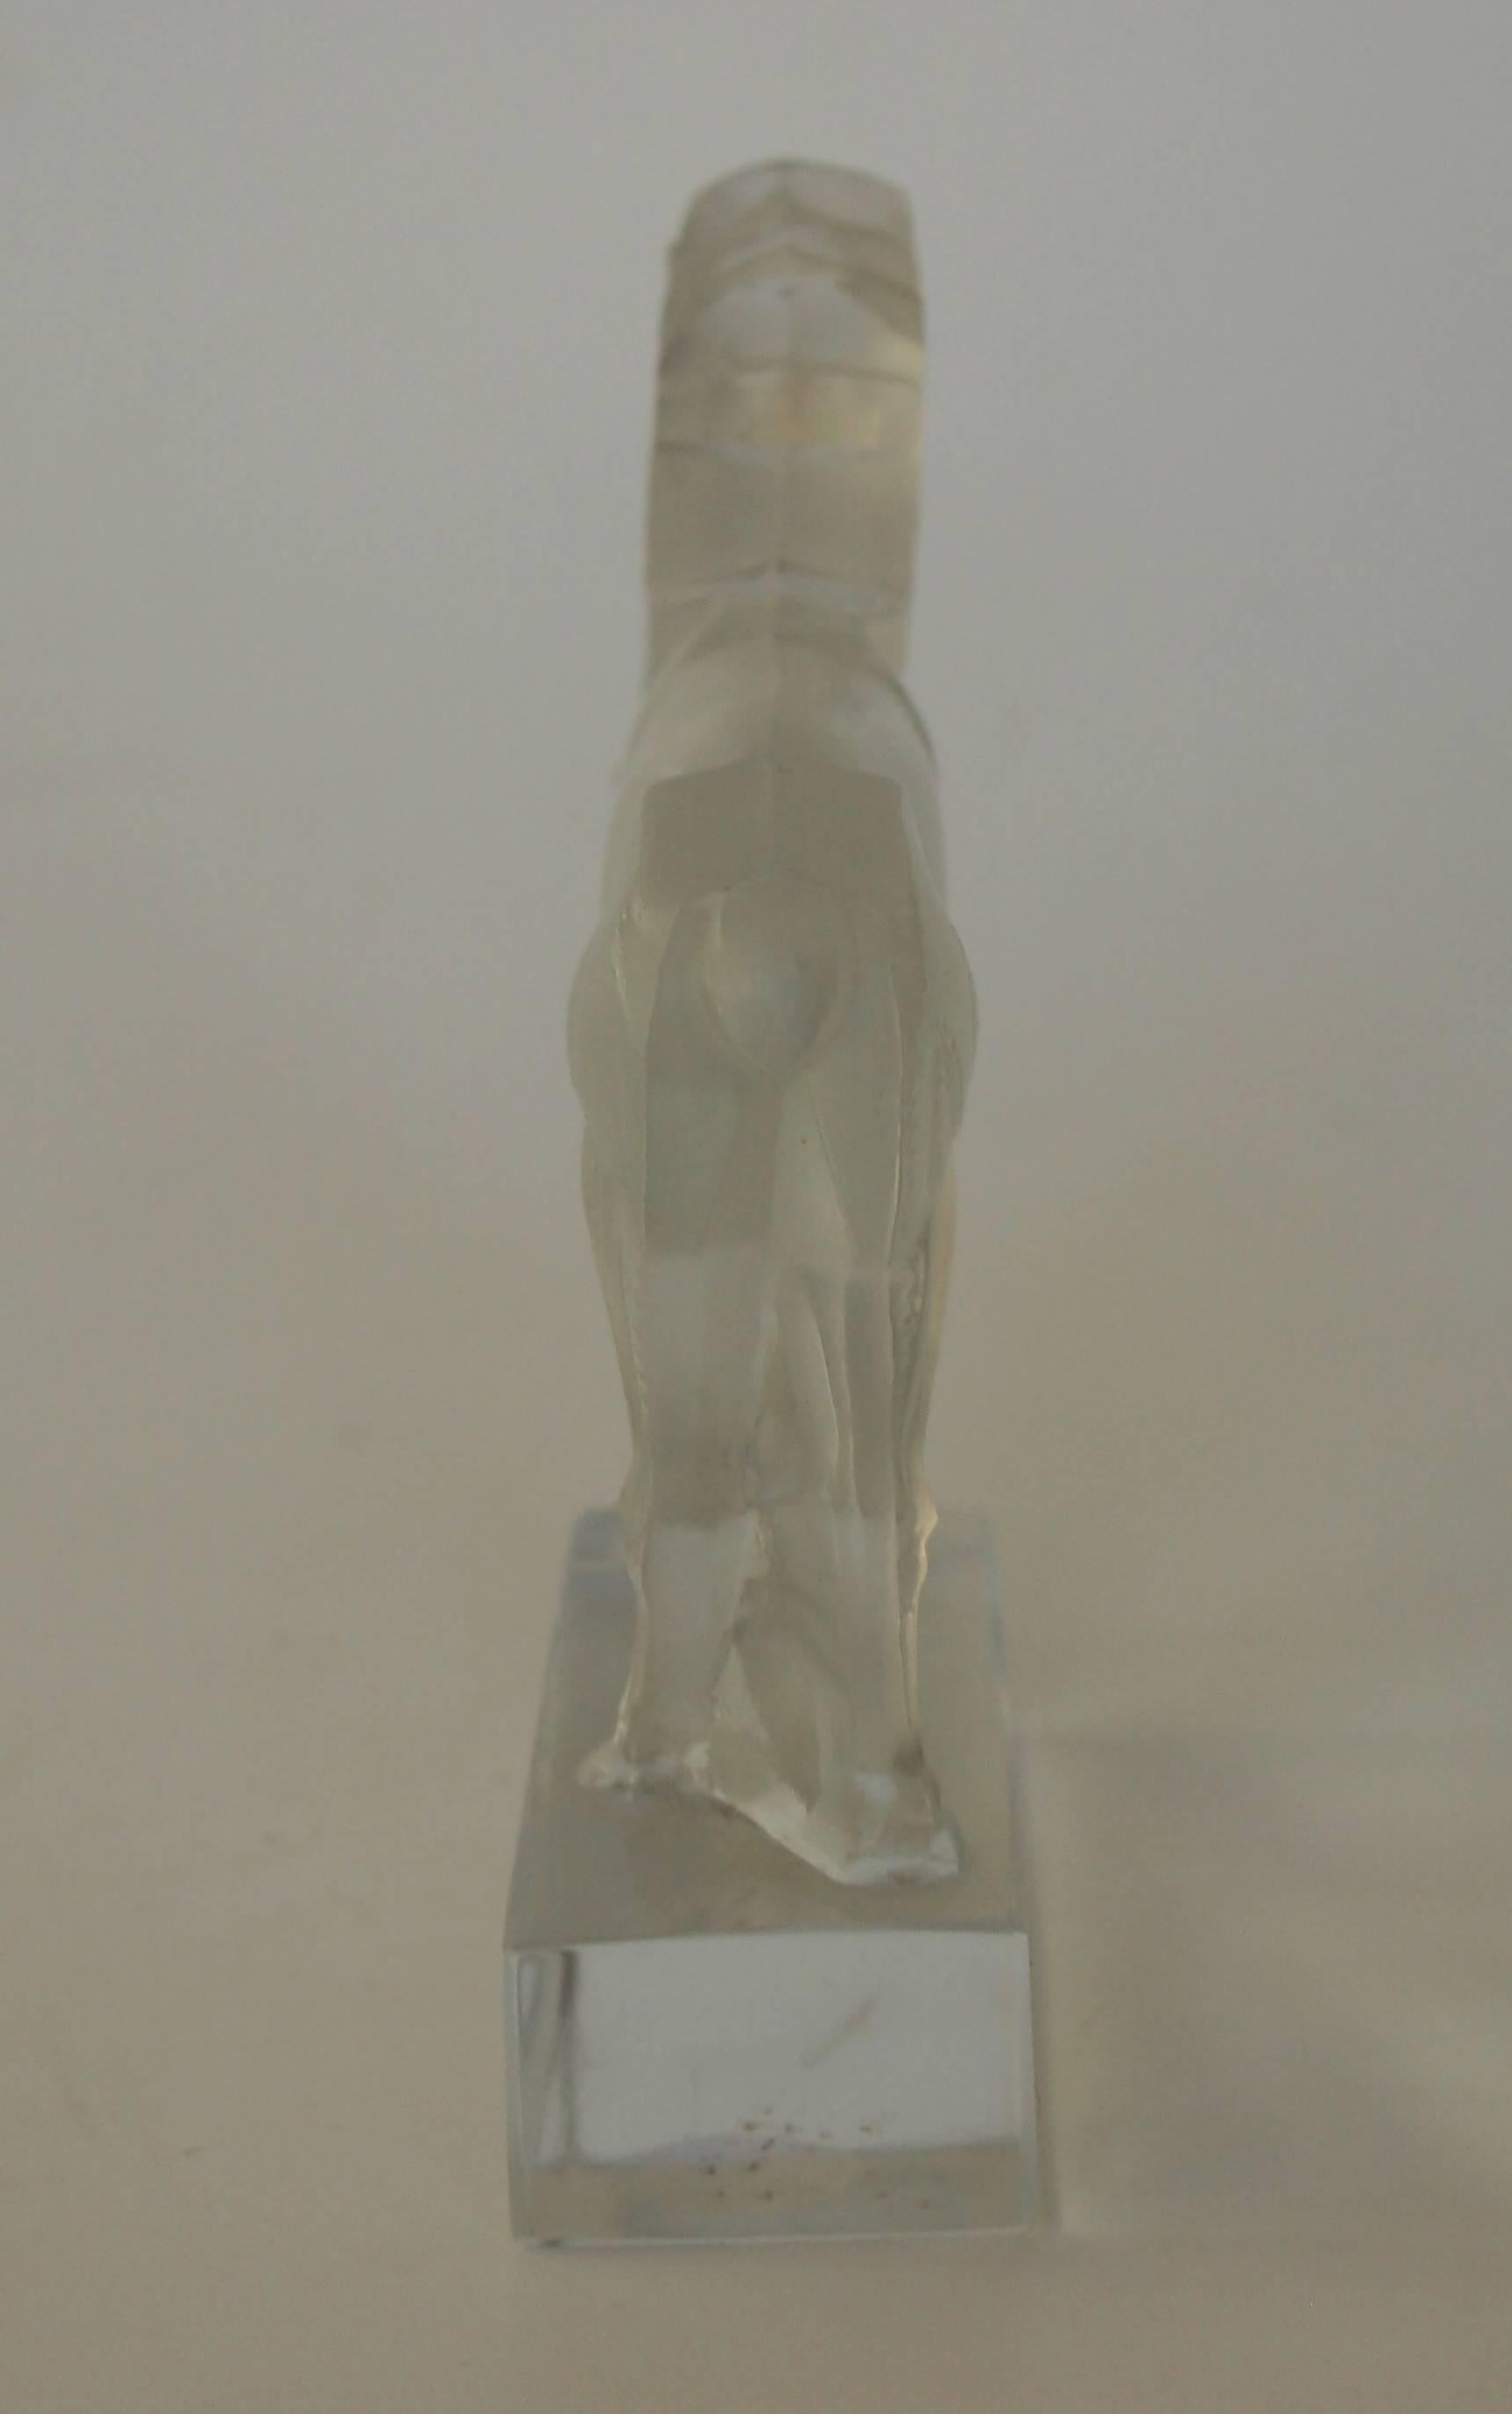 Very rare and highly Art Deco Rene Lalique (Signed R. Lalique France) clear and frosted Renne (Reindeer) paperweight Ref: Marcilhac 1197, designed 1931. One of a series of Art Deco animal paperweights done by Rene Lalique in the late 1920s and